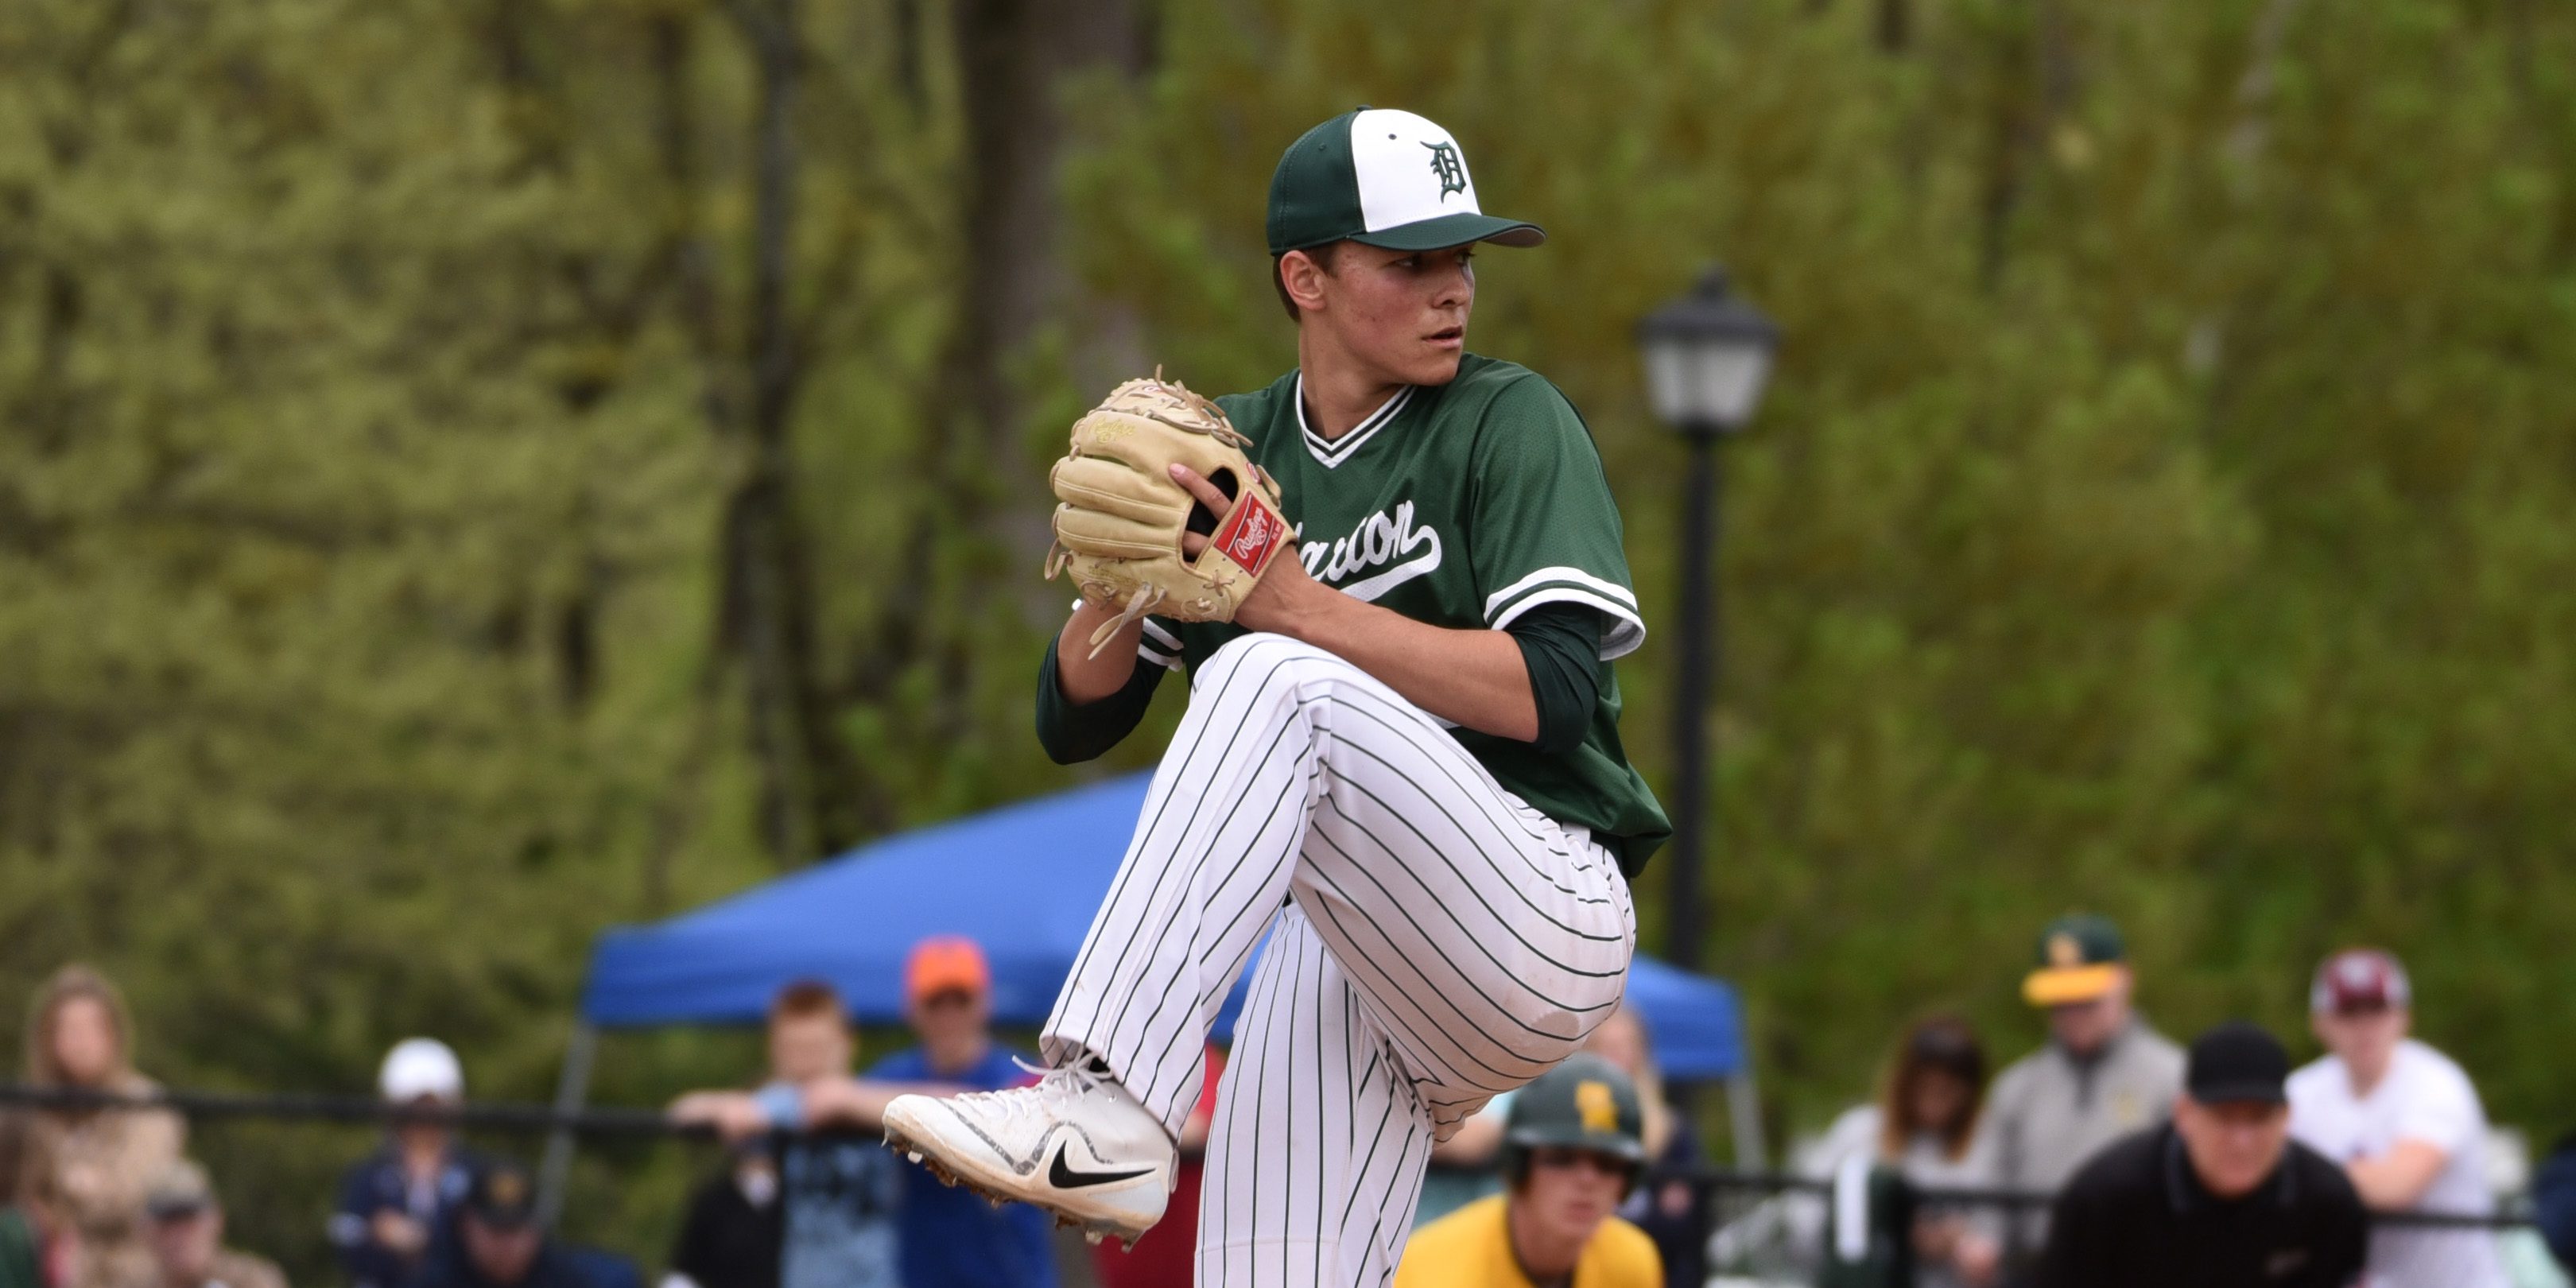 MLB Draft: Delbarton duo Leiter, Volpe could be selected early